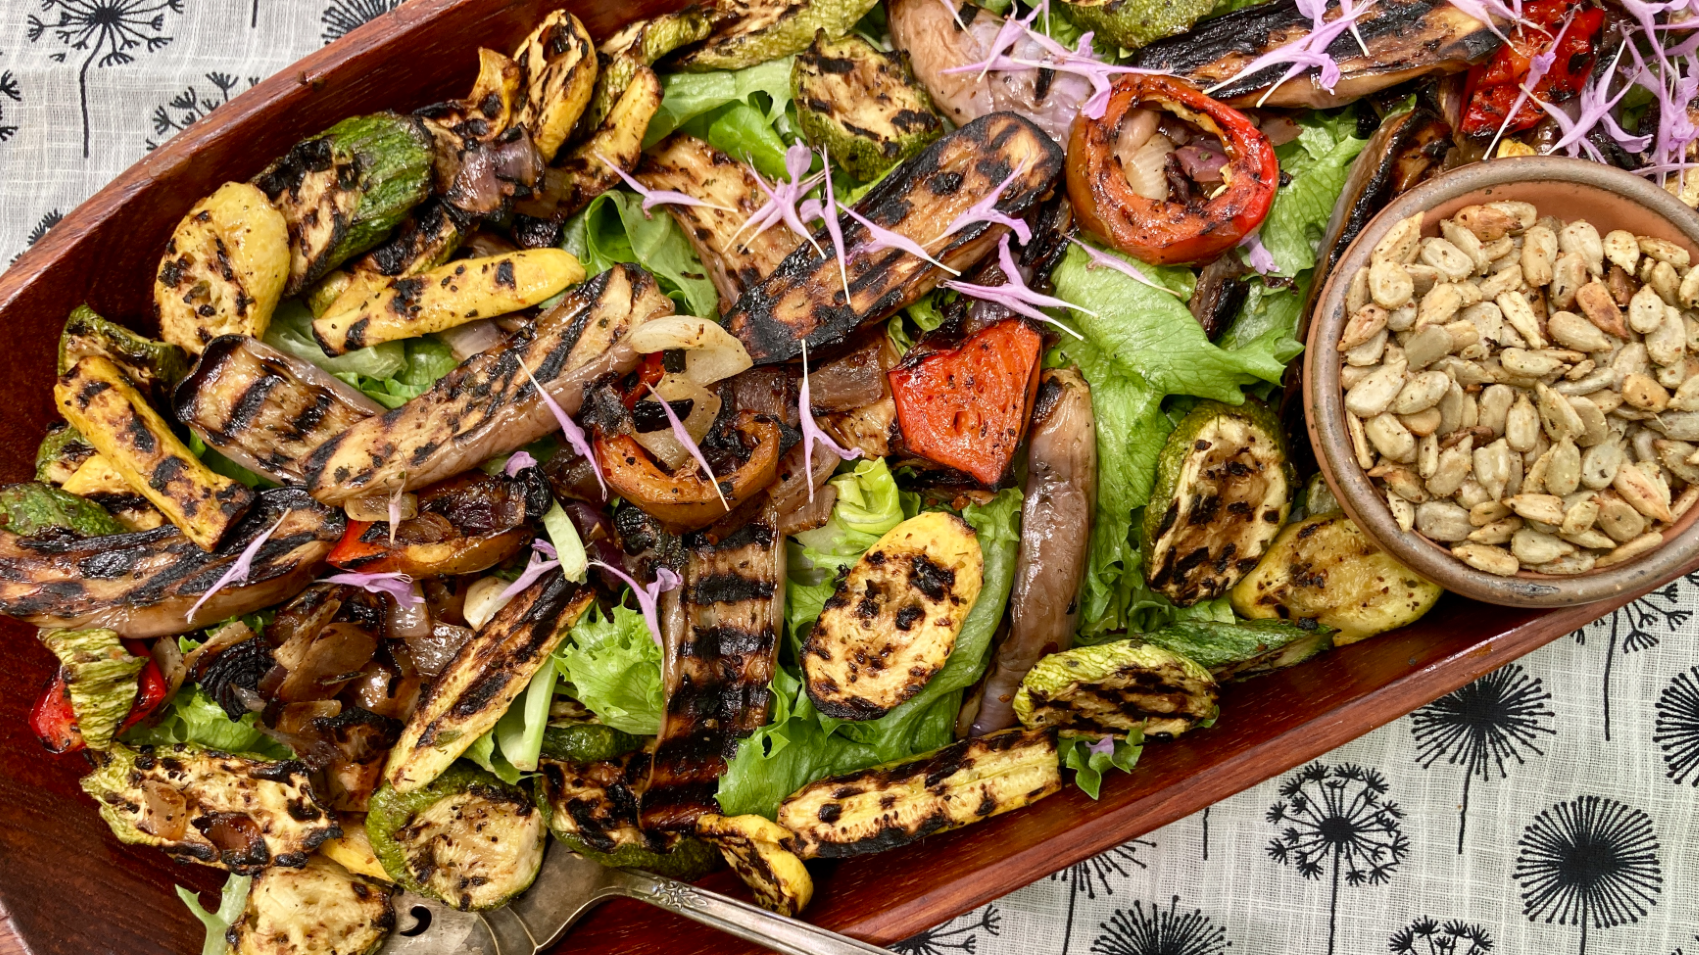 A wooden platter of girlled summer vegetables over lettuce and toasted spiced sunflower seeds on a floral textile background.